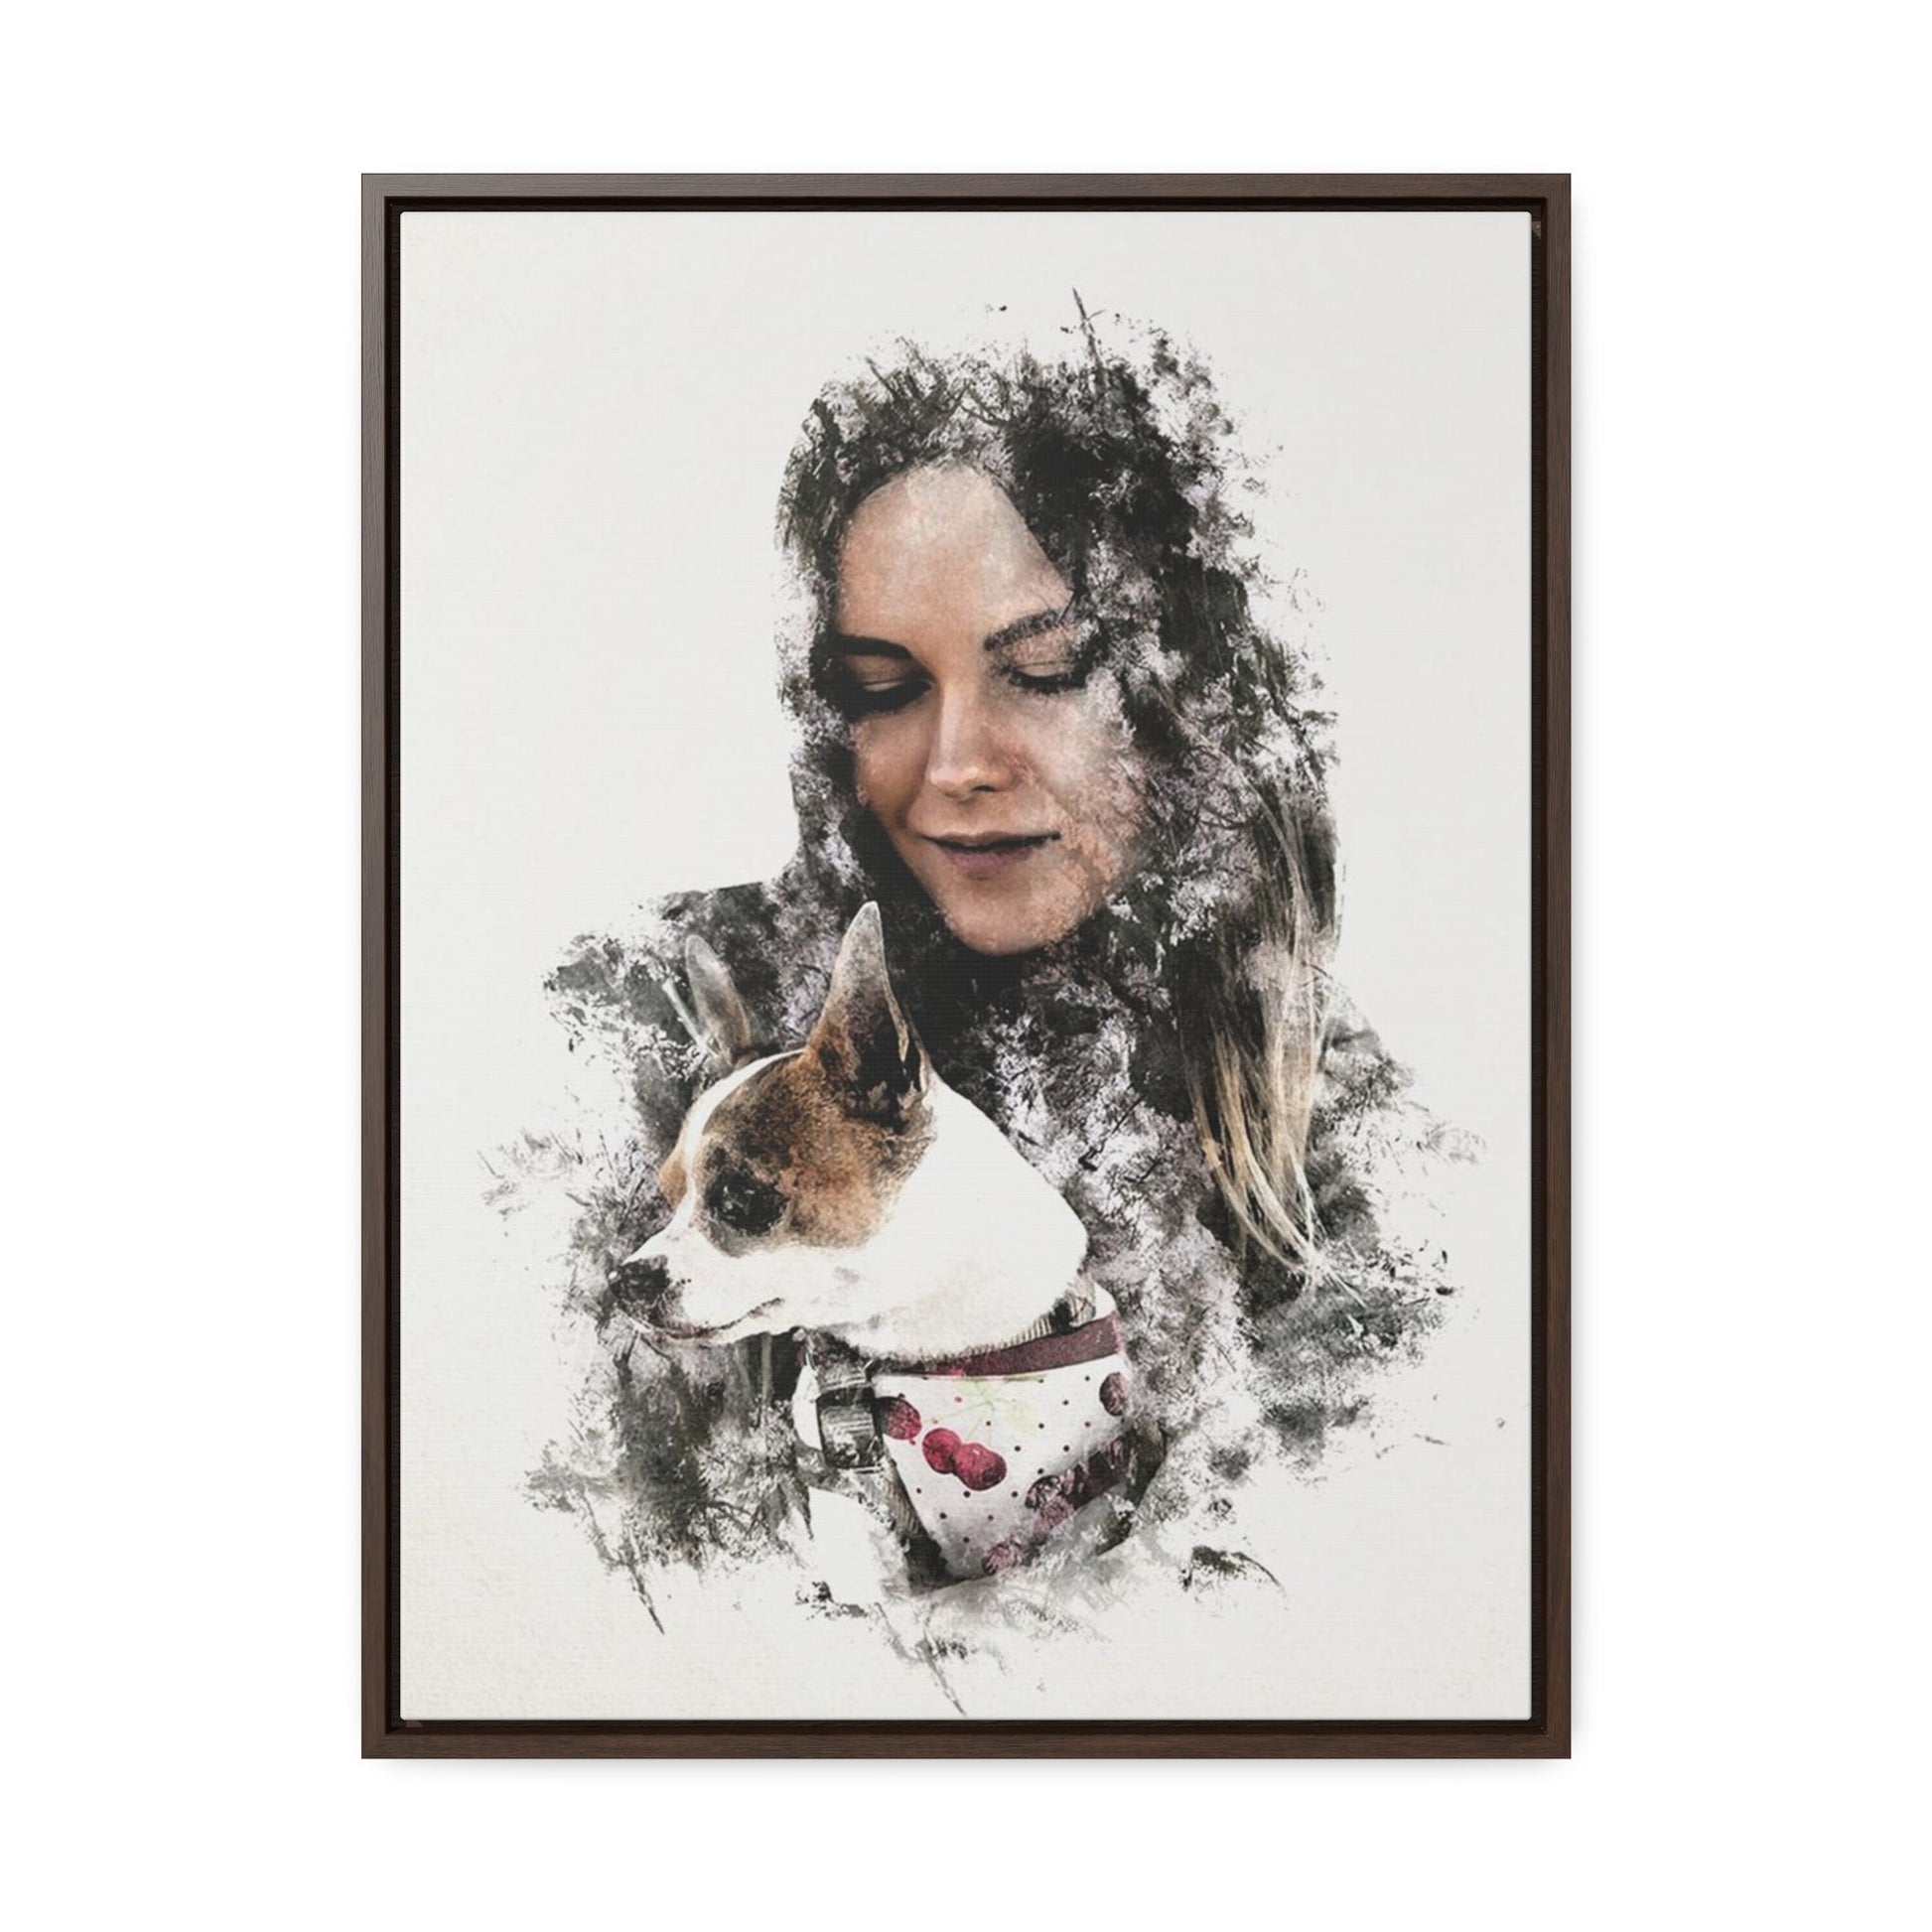 Personalized girl with dog portrait in framed canvas, Zeinna's heartfelt gift.